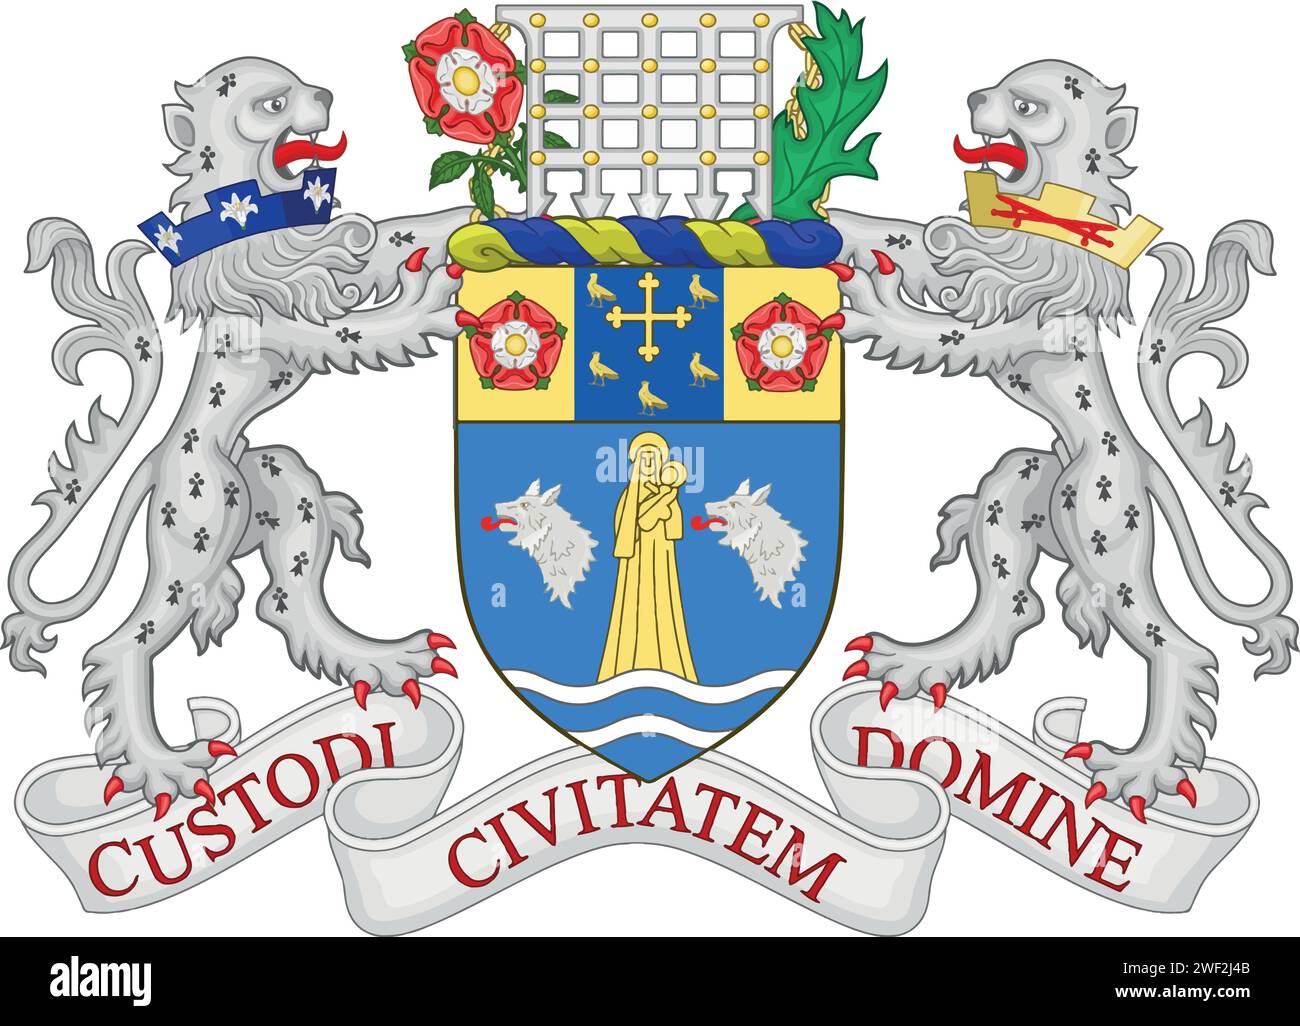 Coat of arms of the CITY OF WESTMINSTER, LONDON Stock Vector